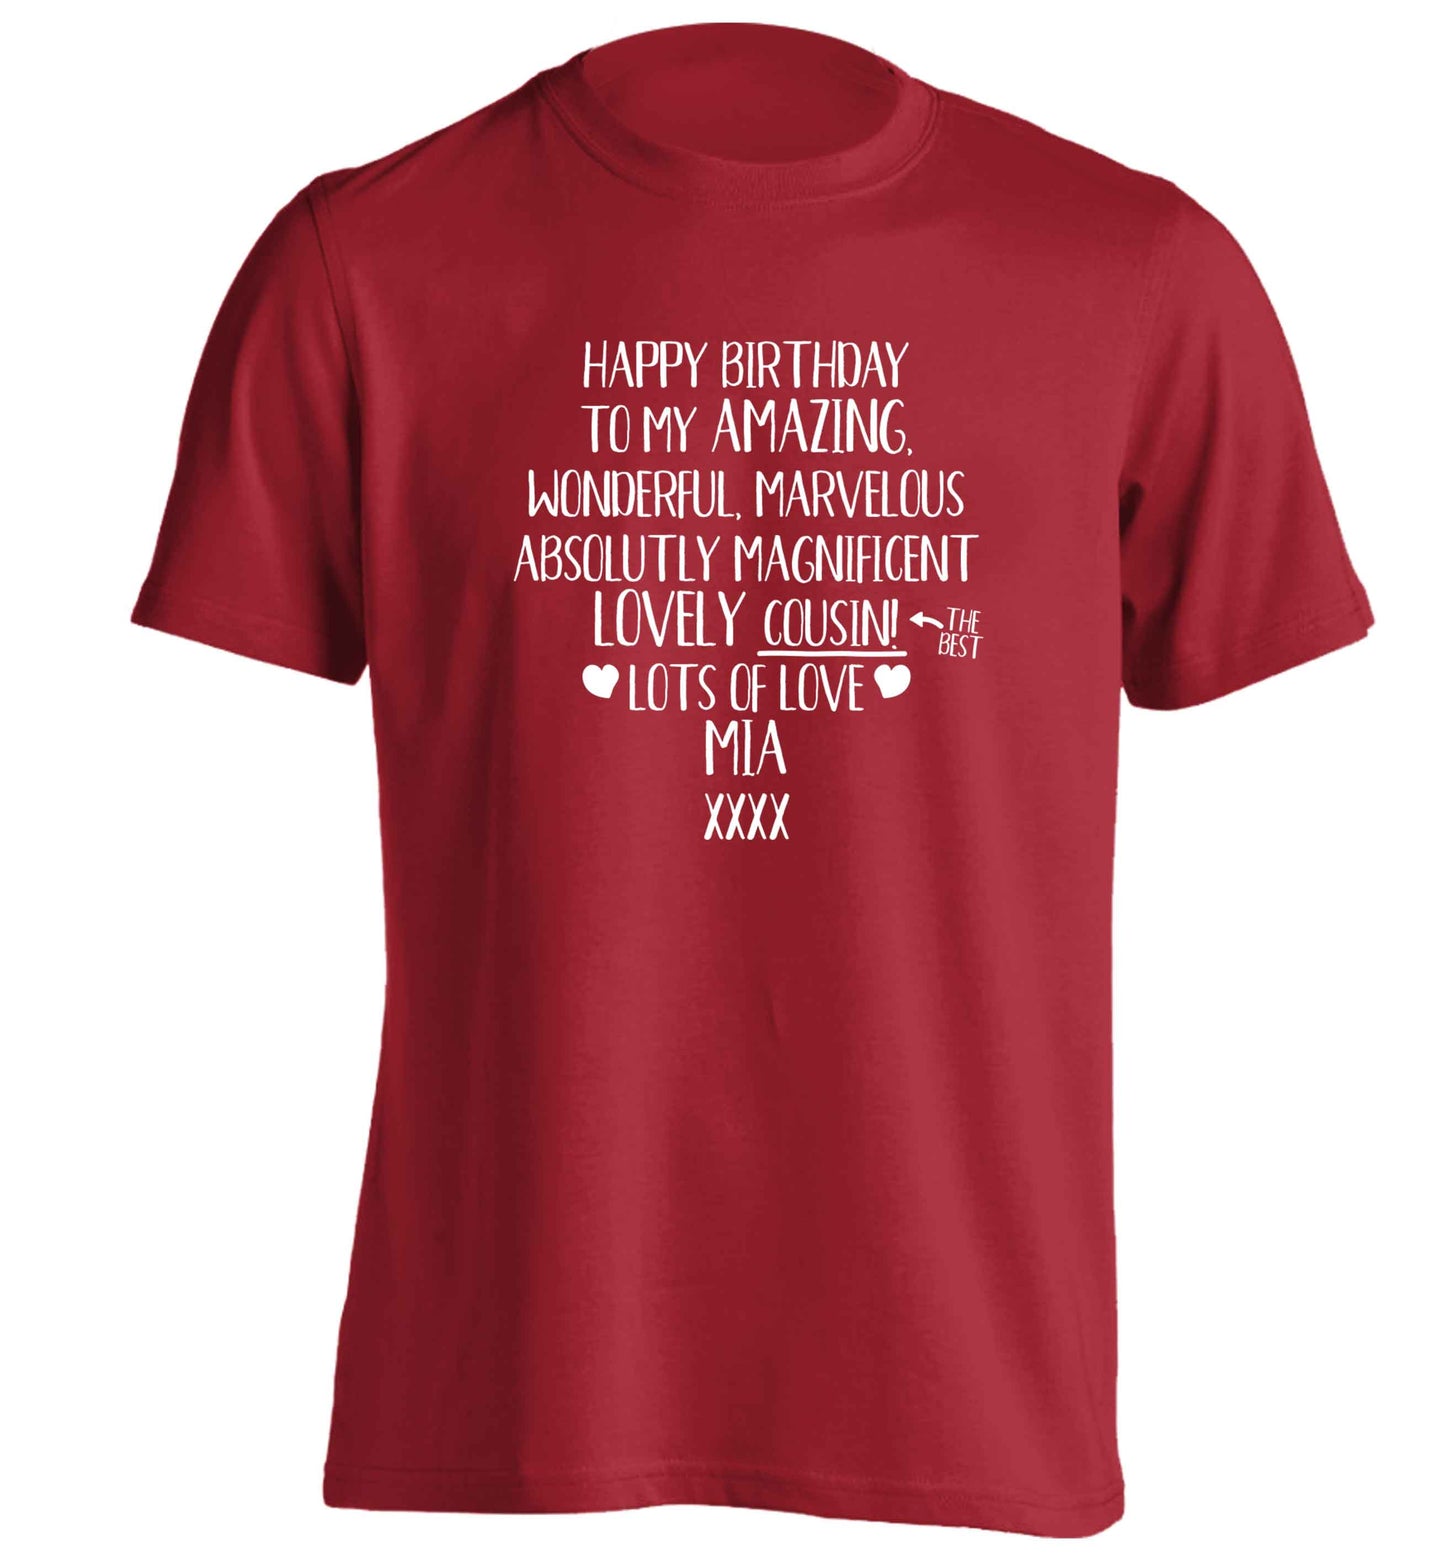 Personalised happy birthday to my amazing, wonderful, lovely cousin adults unisex red Tshirt 2XL